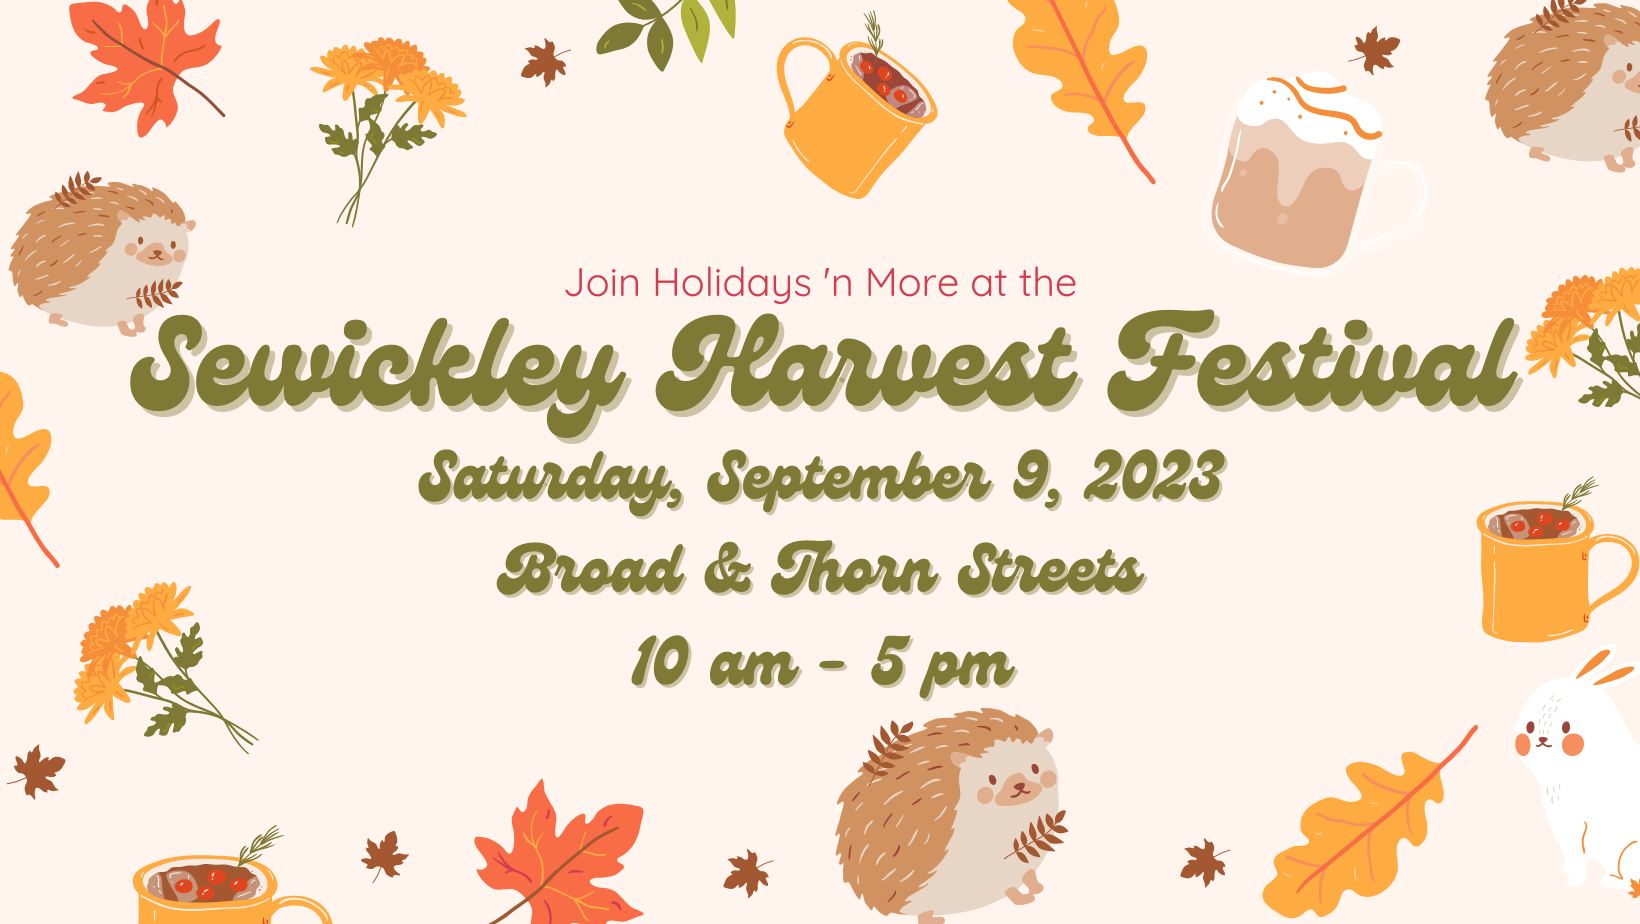 Sewickley Harvest Festival 2023 SPG Events and Festivals